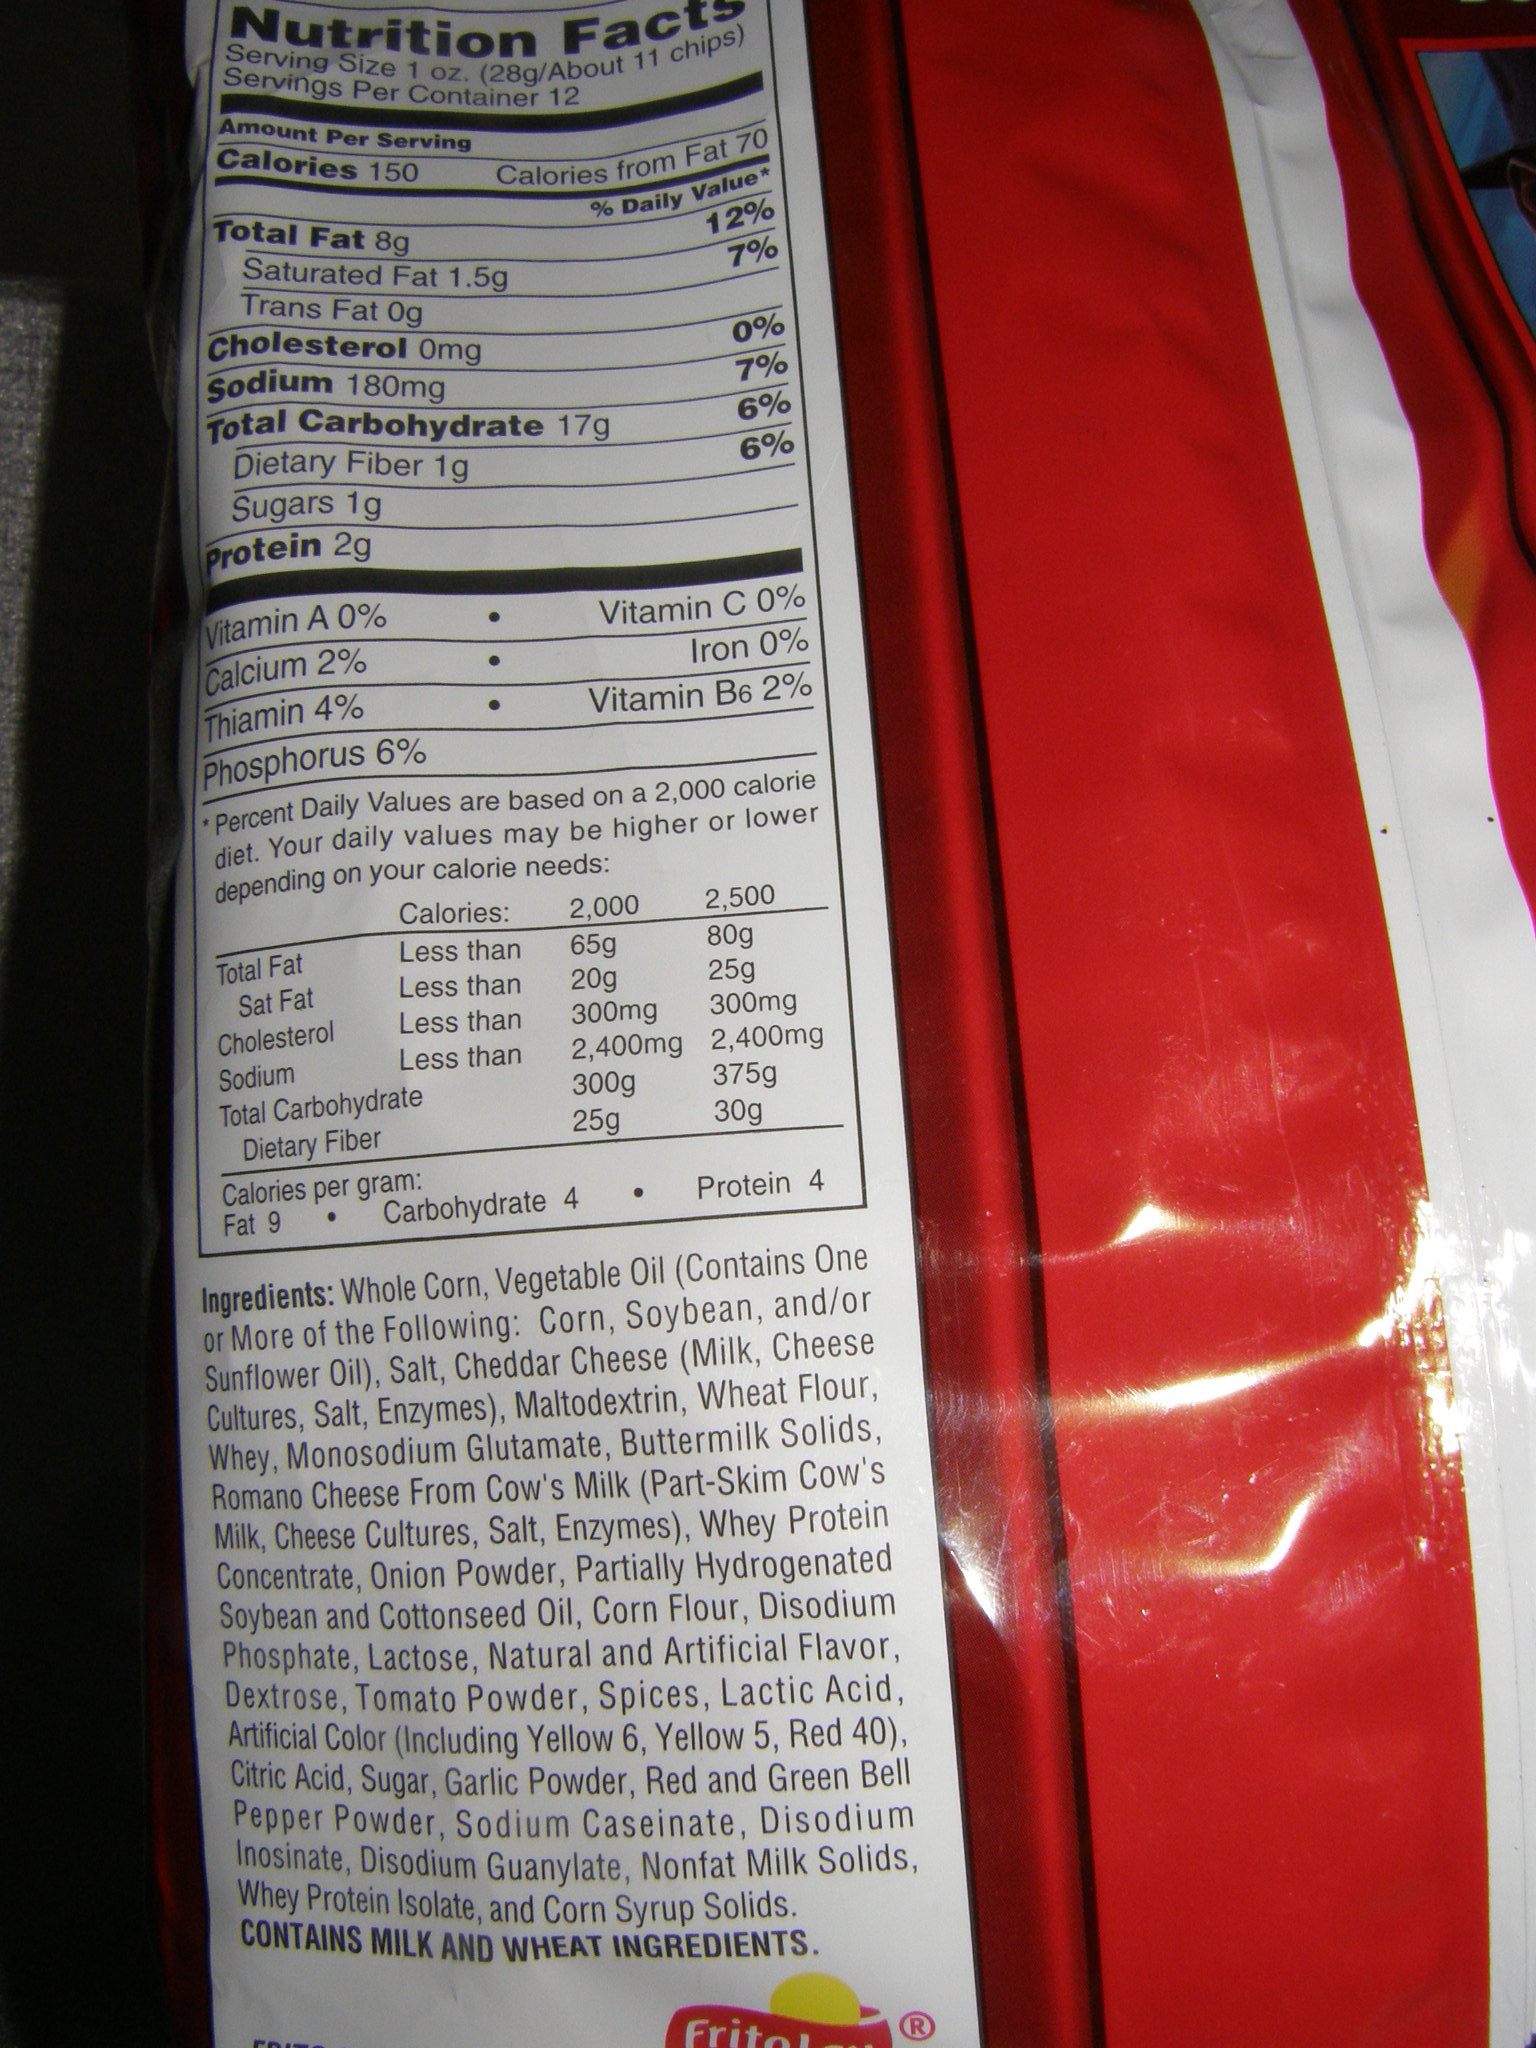 Dye Diet Eat Food Not Food Additives intended for Nutrition Facts Doritos